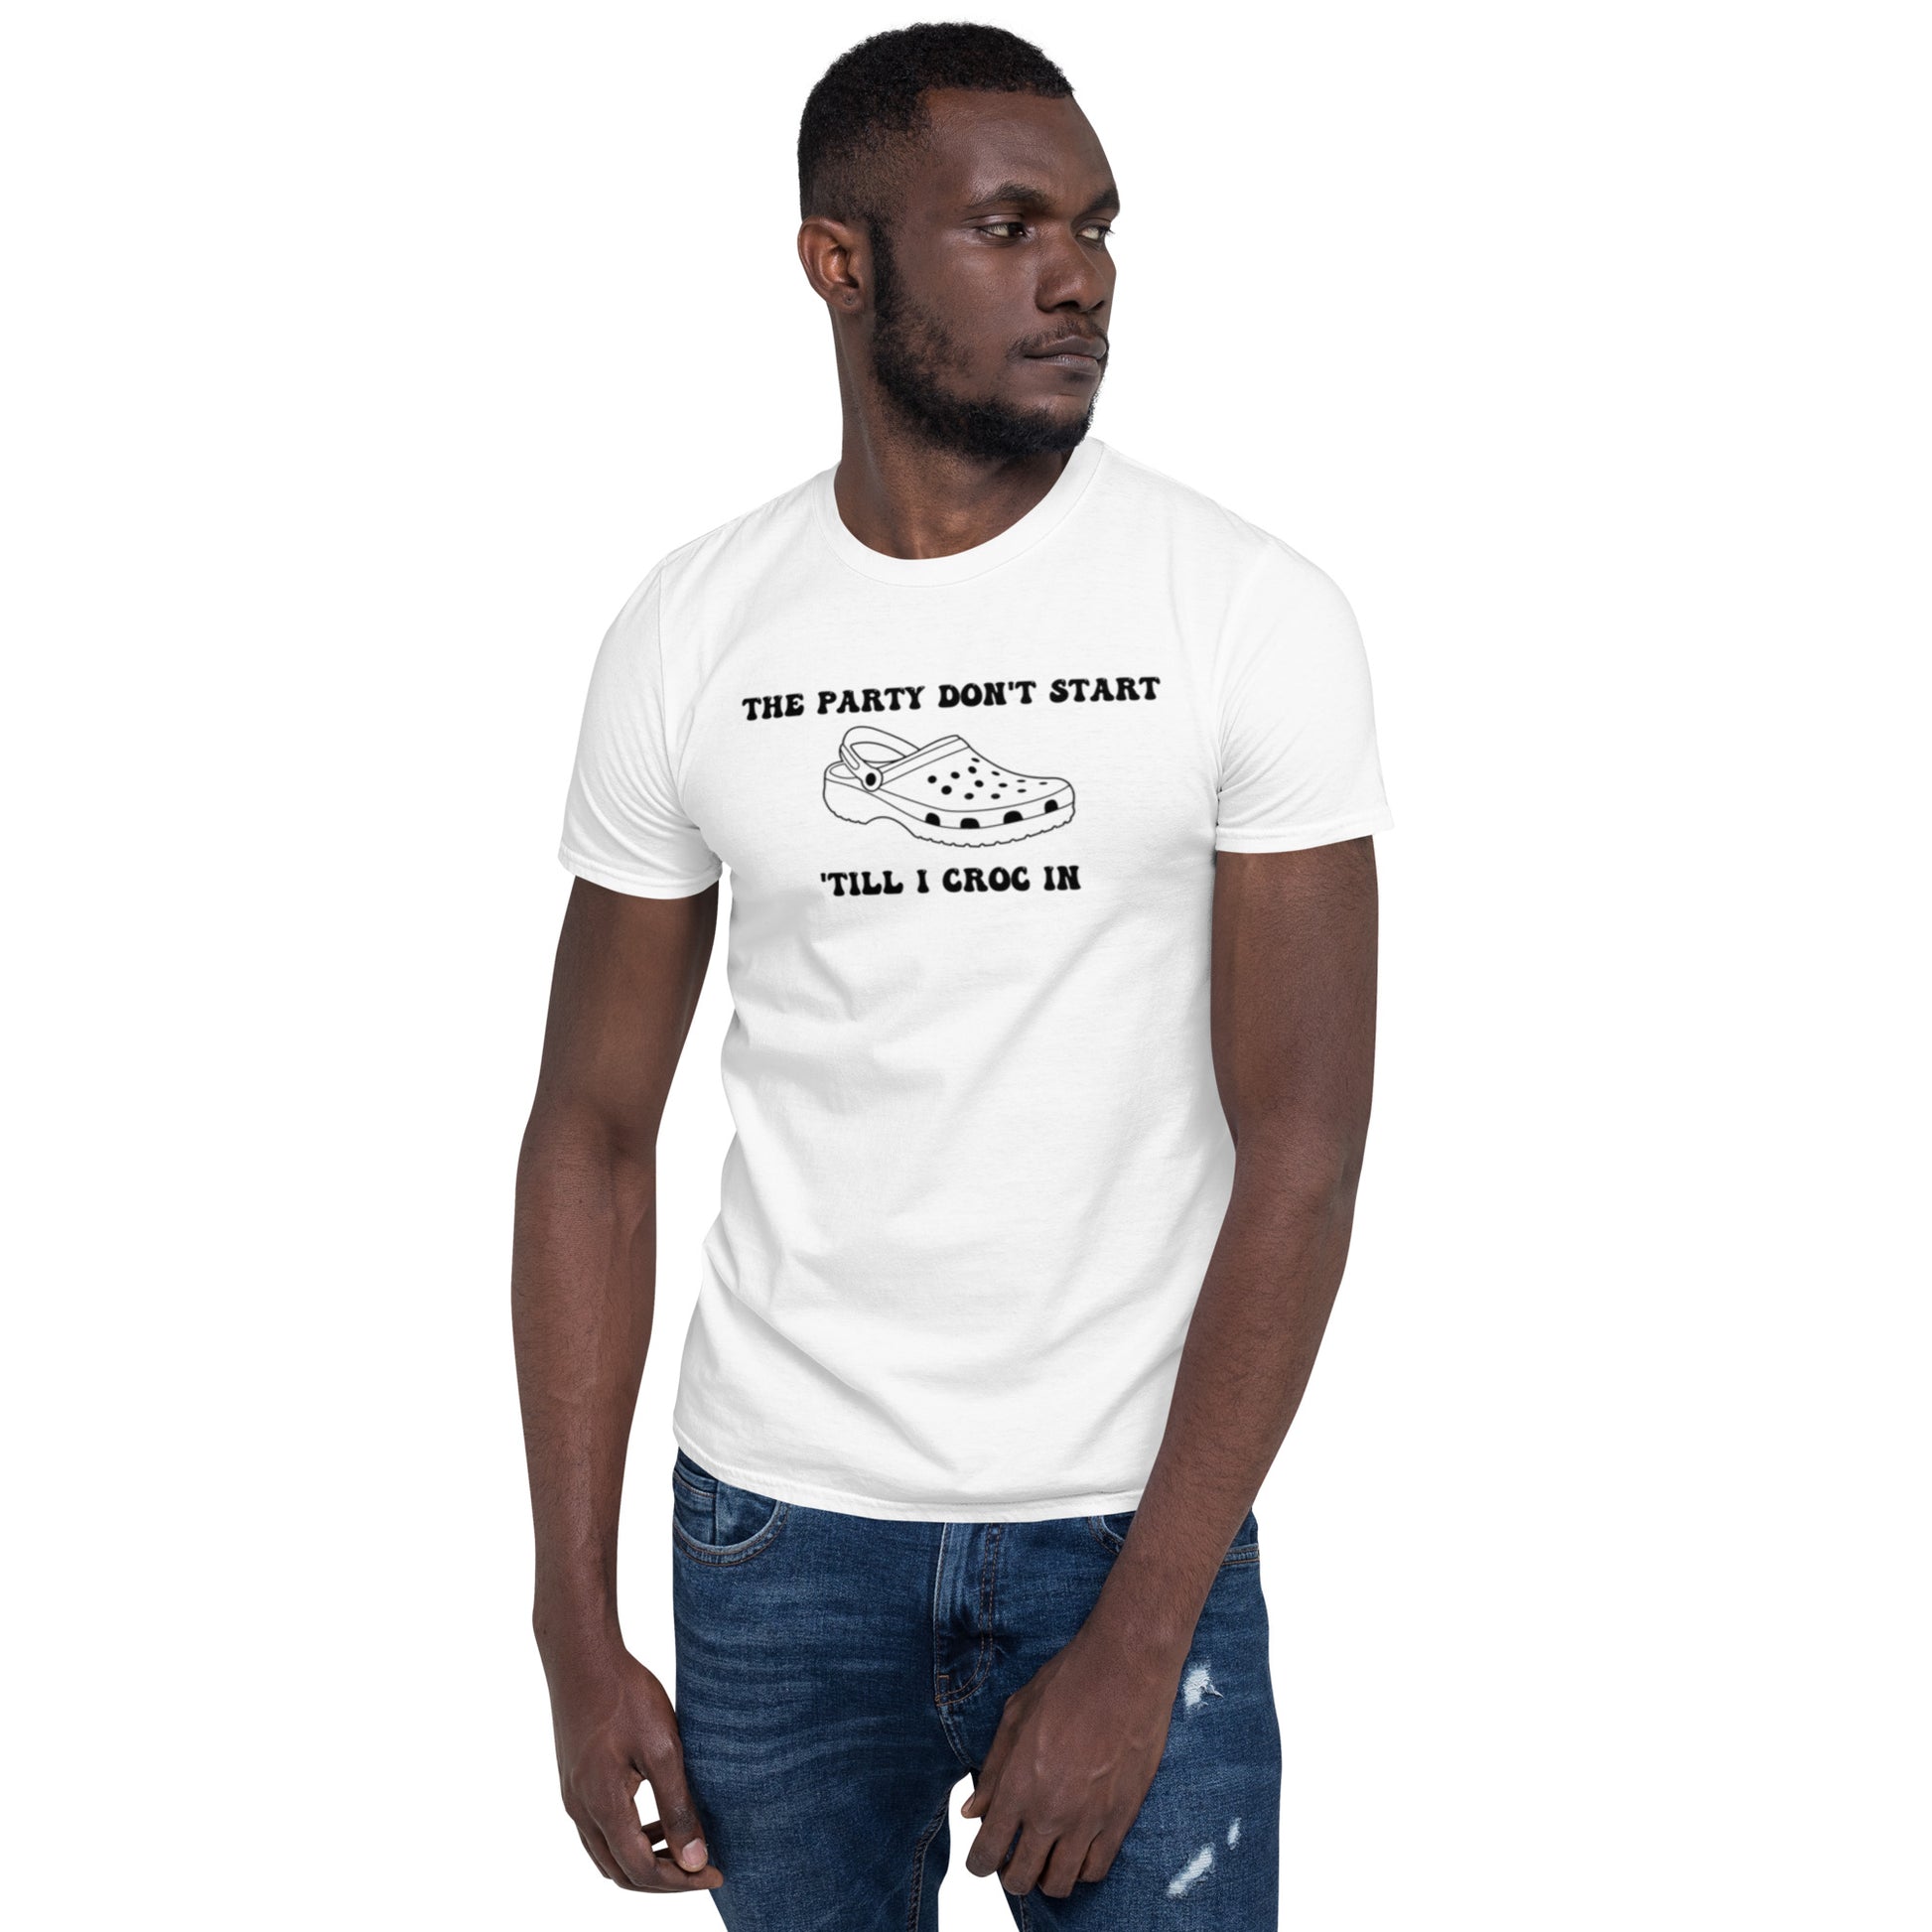 The Party Don’t Start ’Till I Croc In Short-Sleeve Unisex